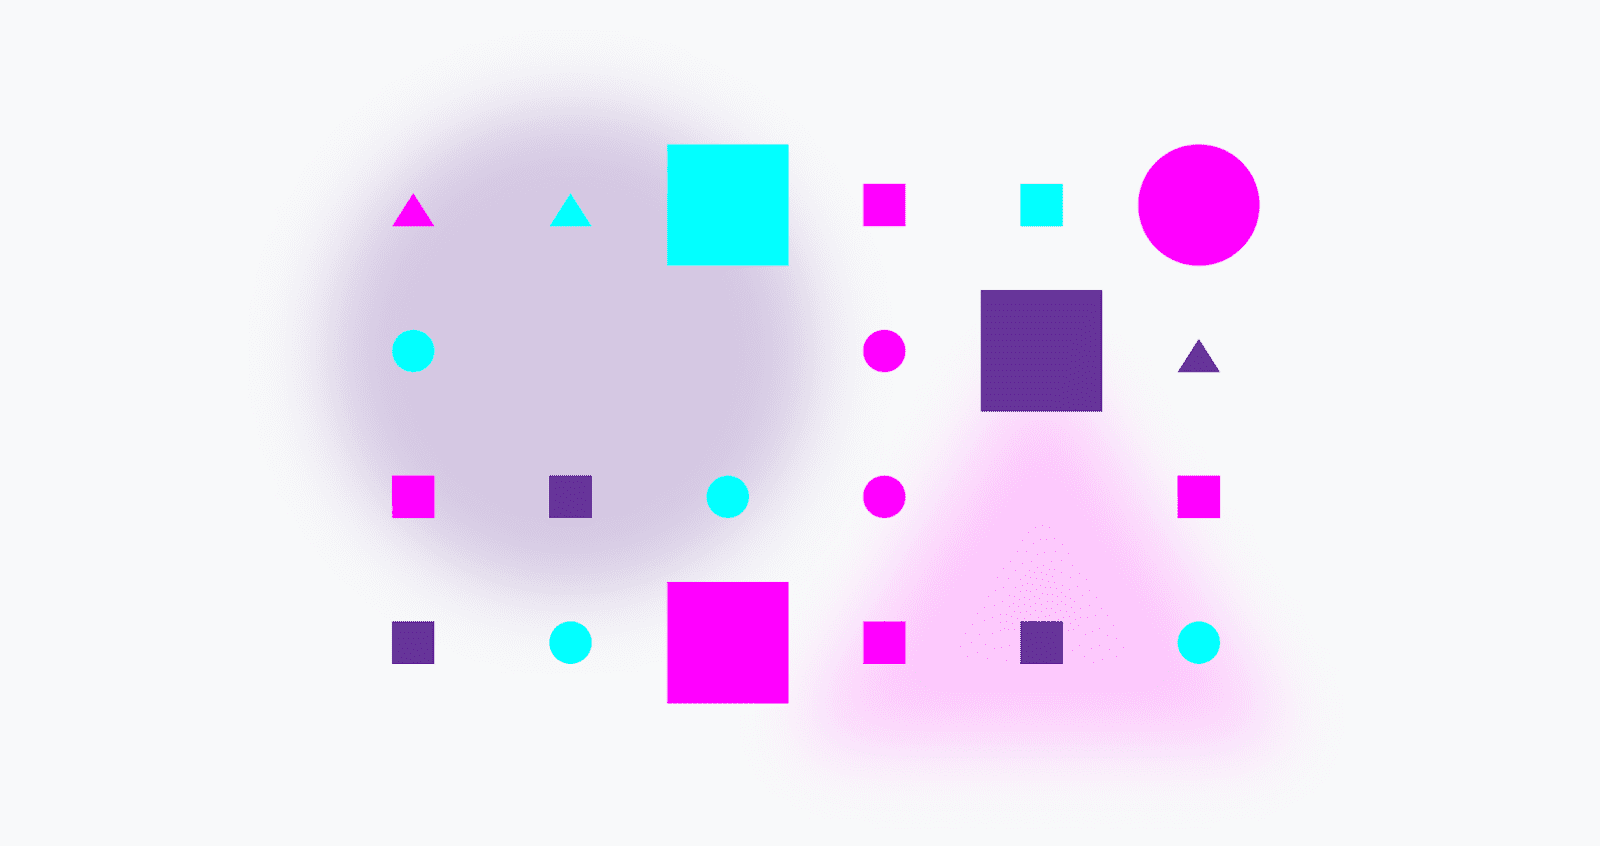 The colorful grid only has small and medium shapes visible.